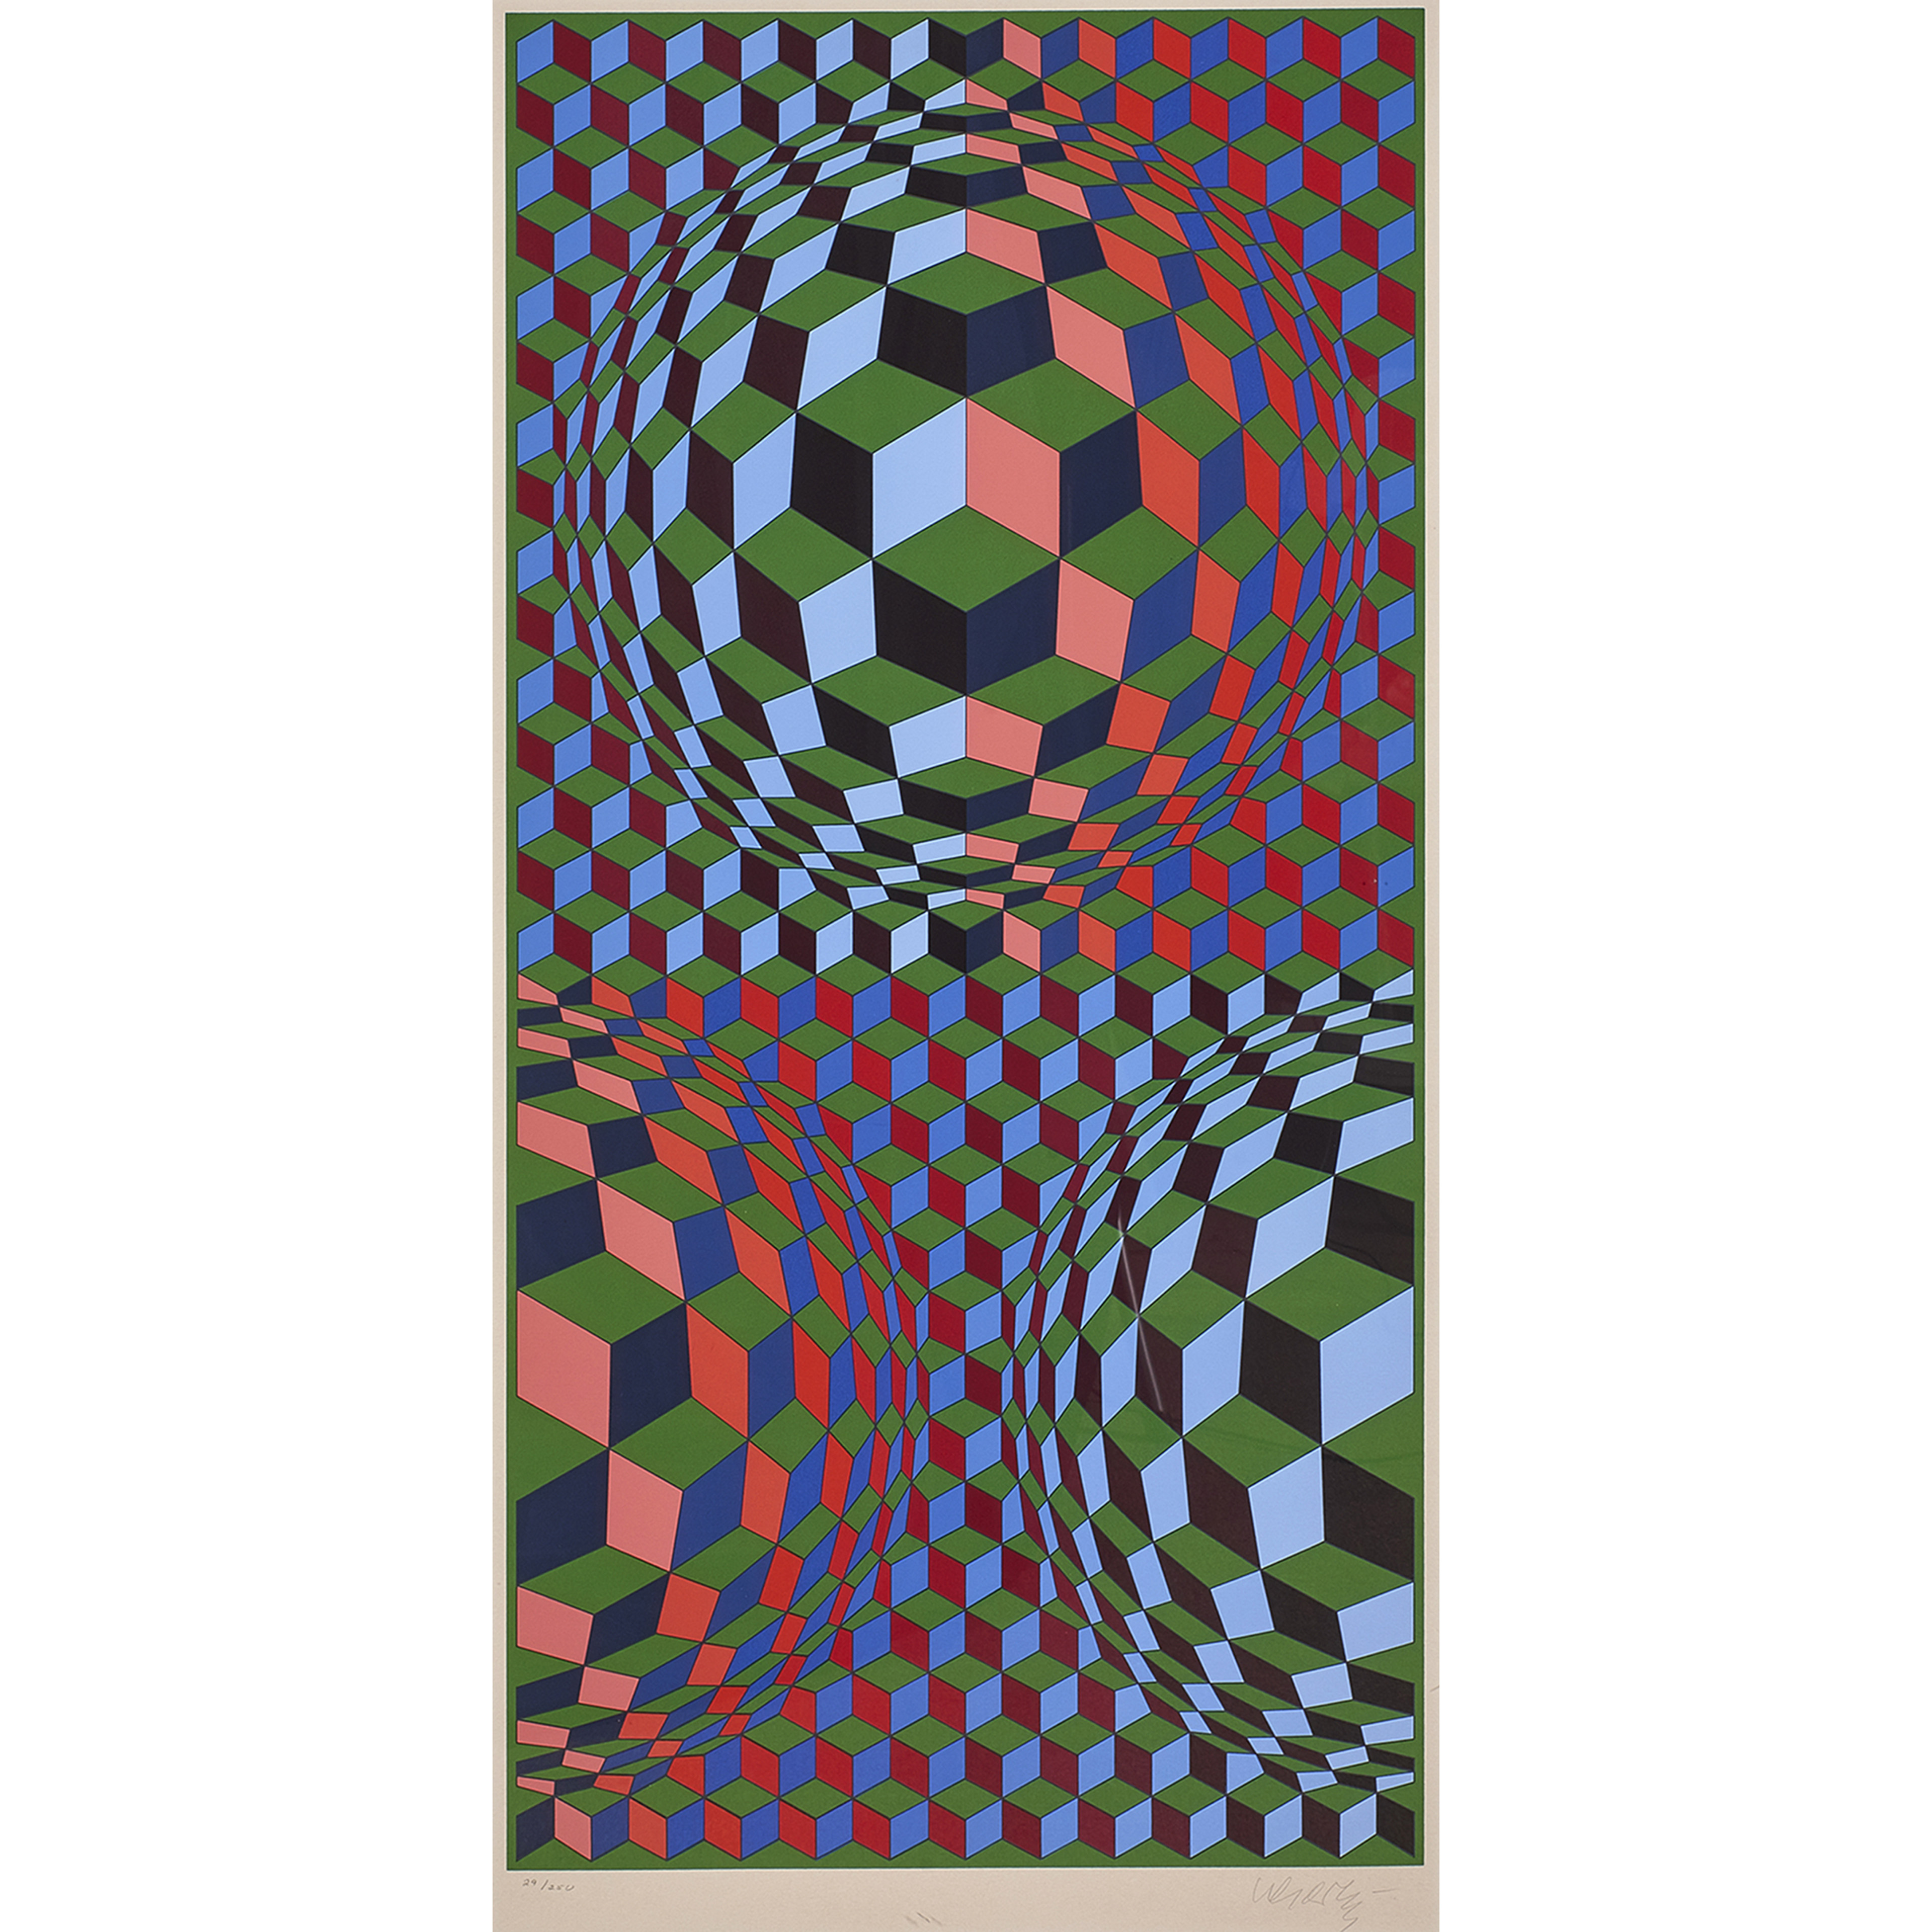 PRINT VICTOR VASARELY Victor Vasarely 3a5a6c